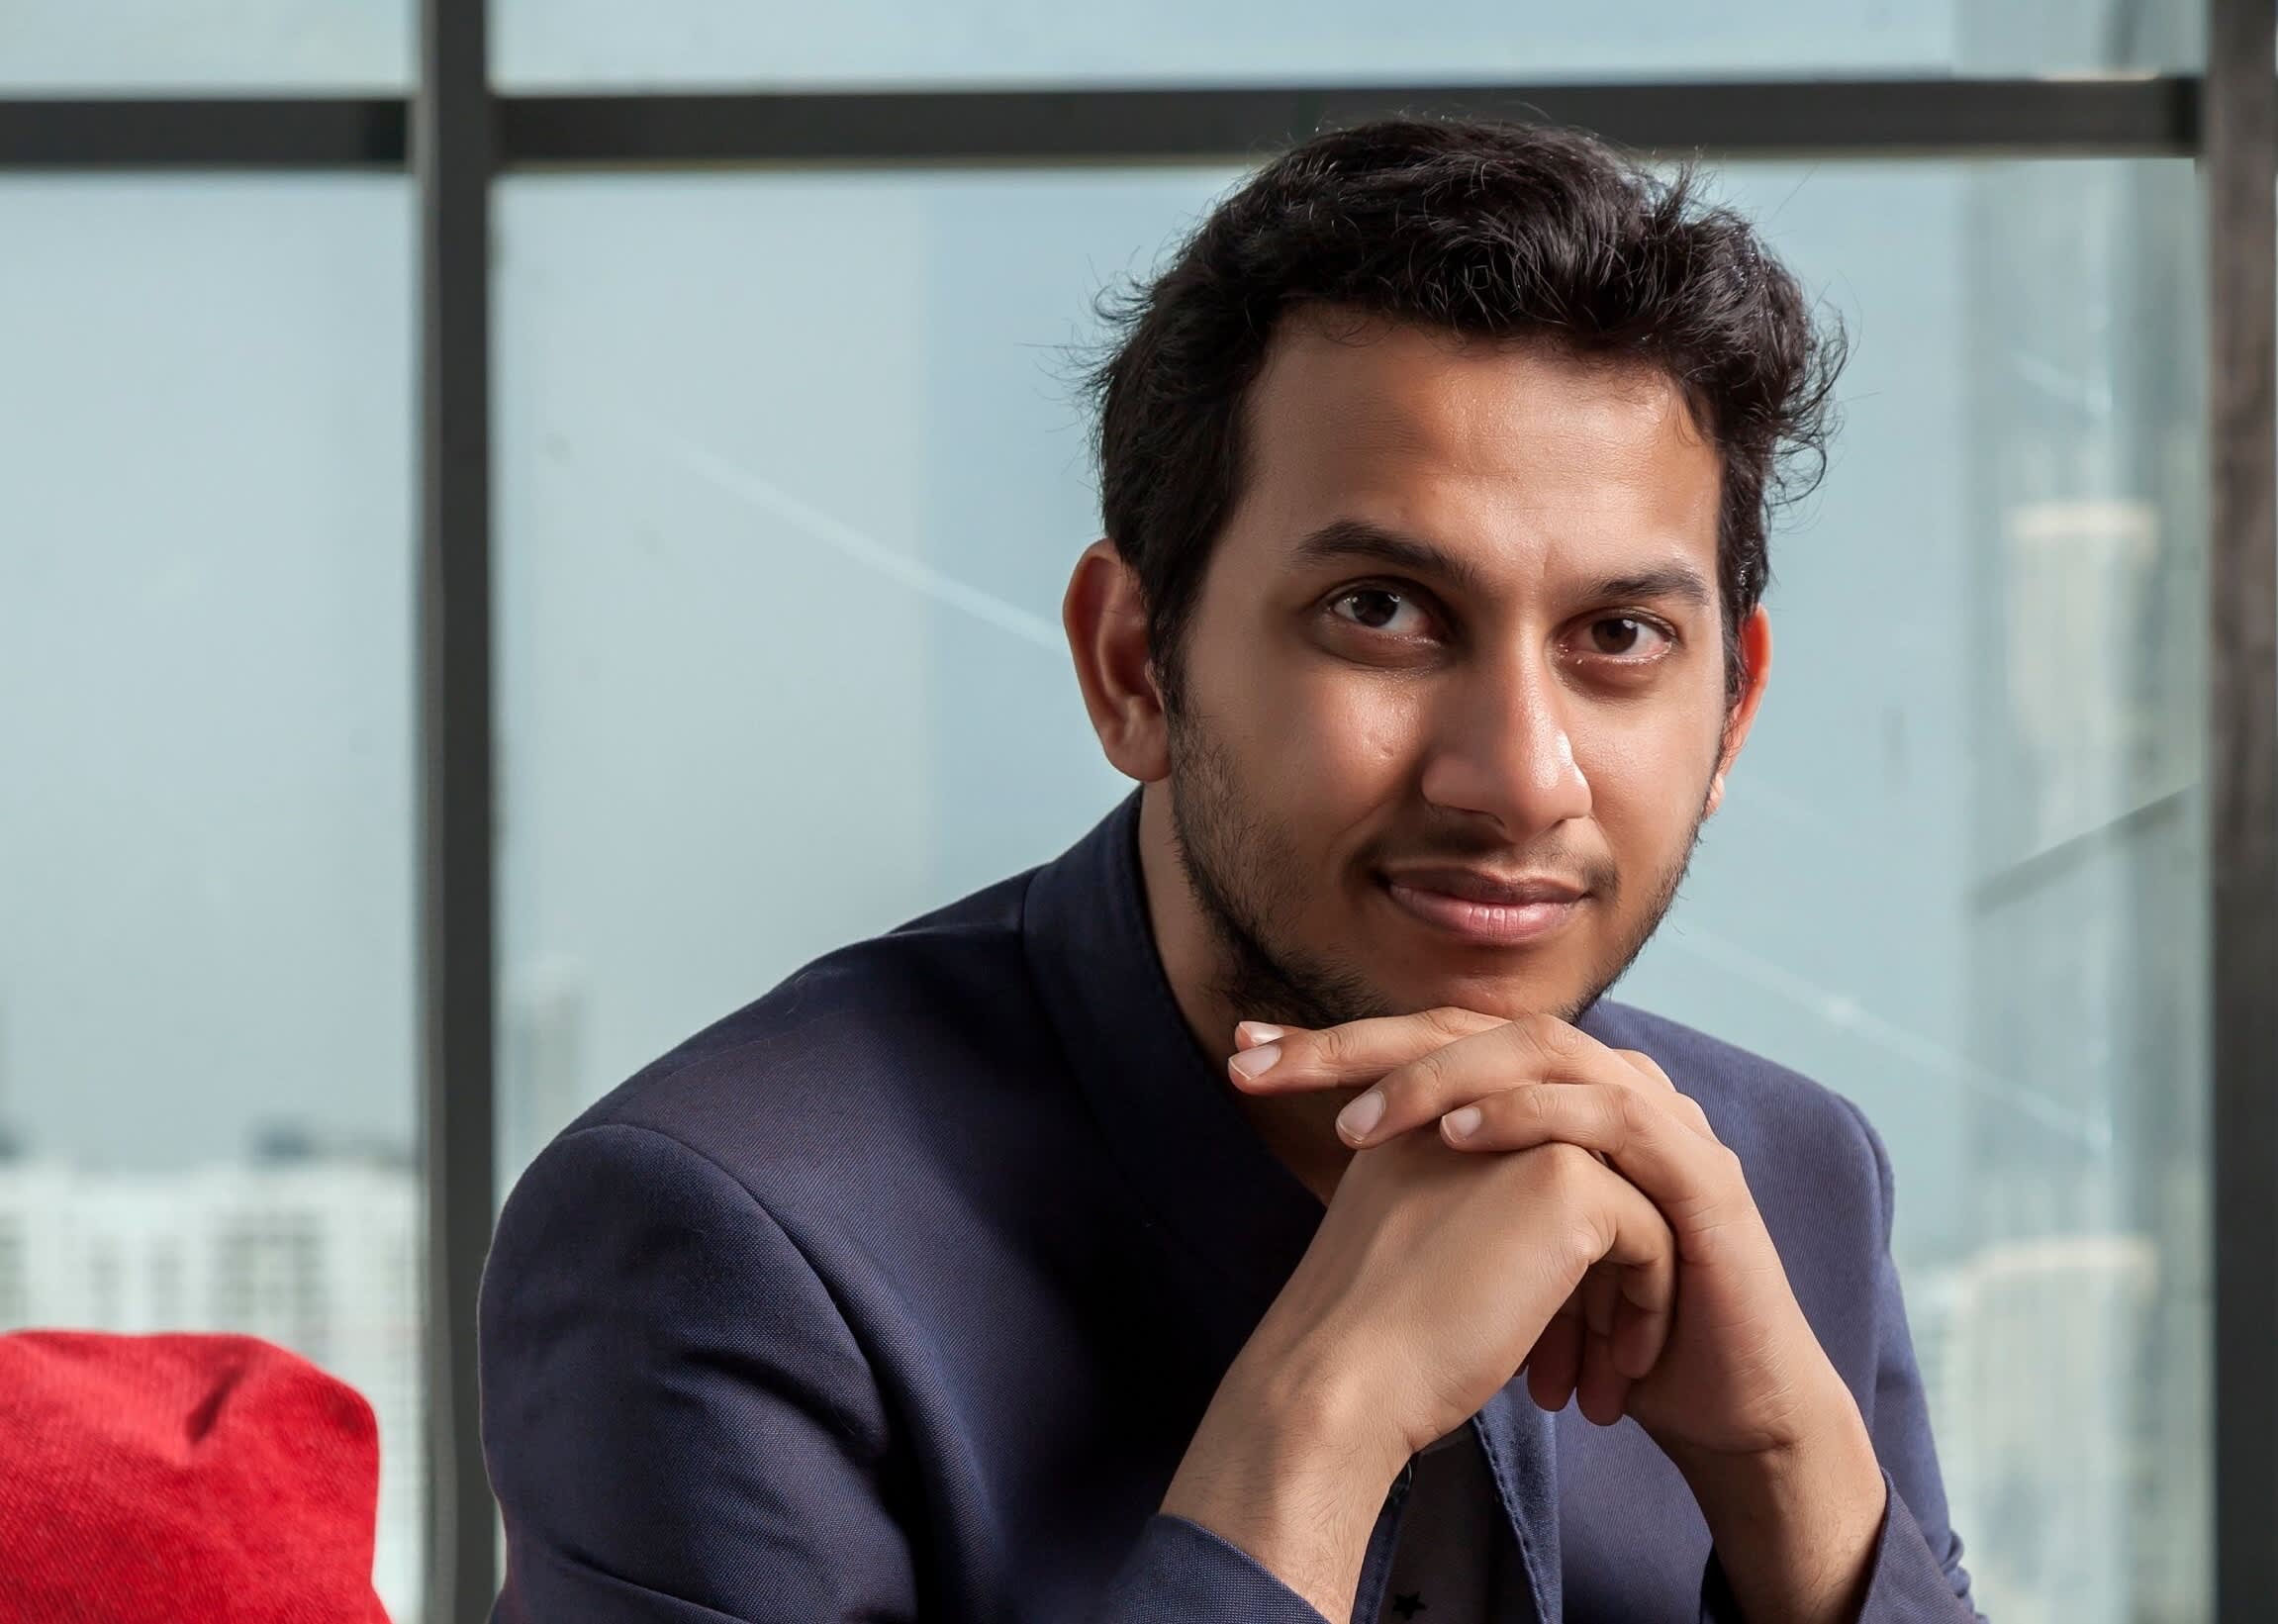 Watch CNBC's full interview with OYO CEO Ritesh Agarwal